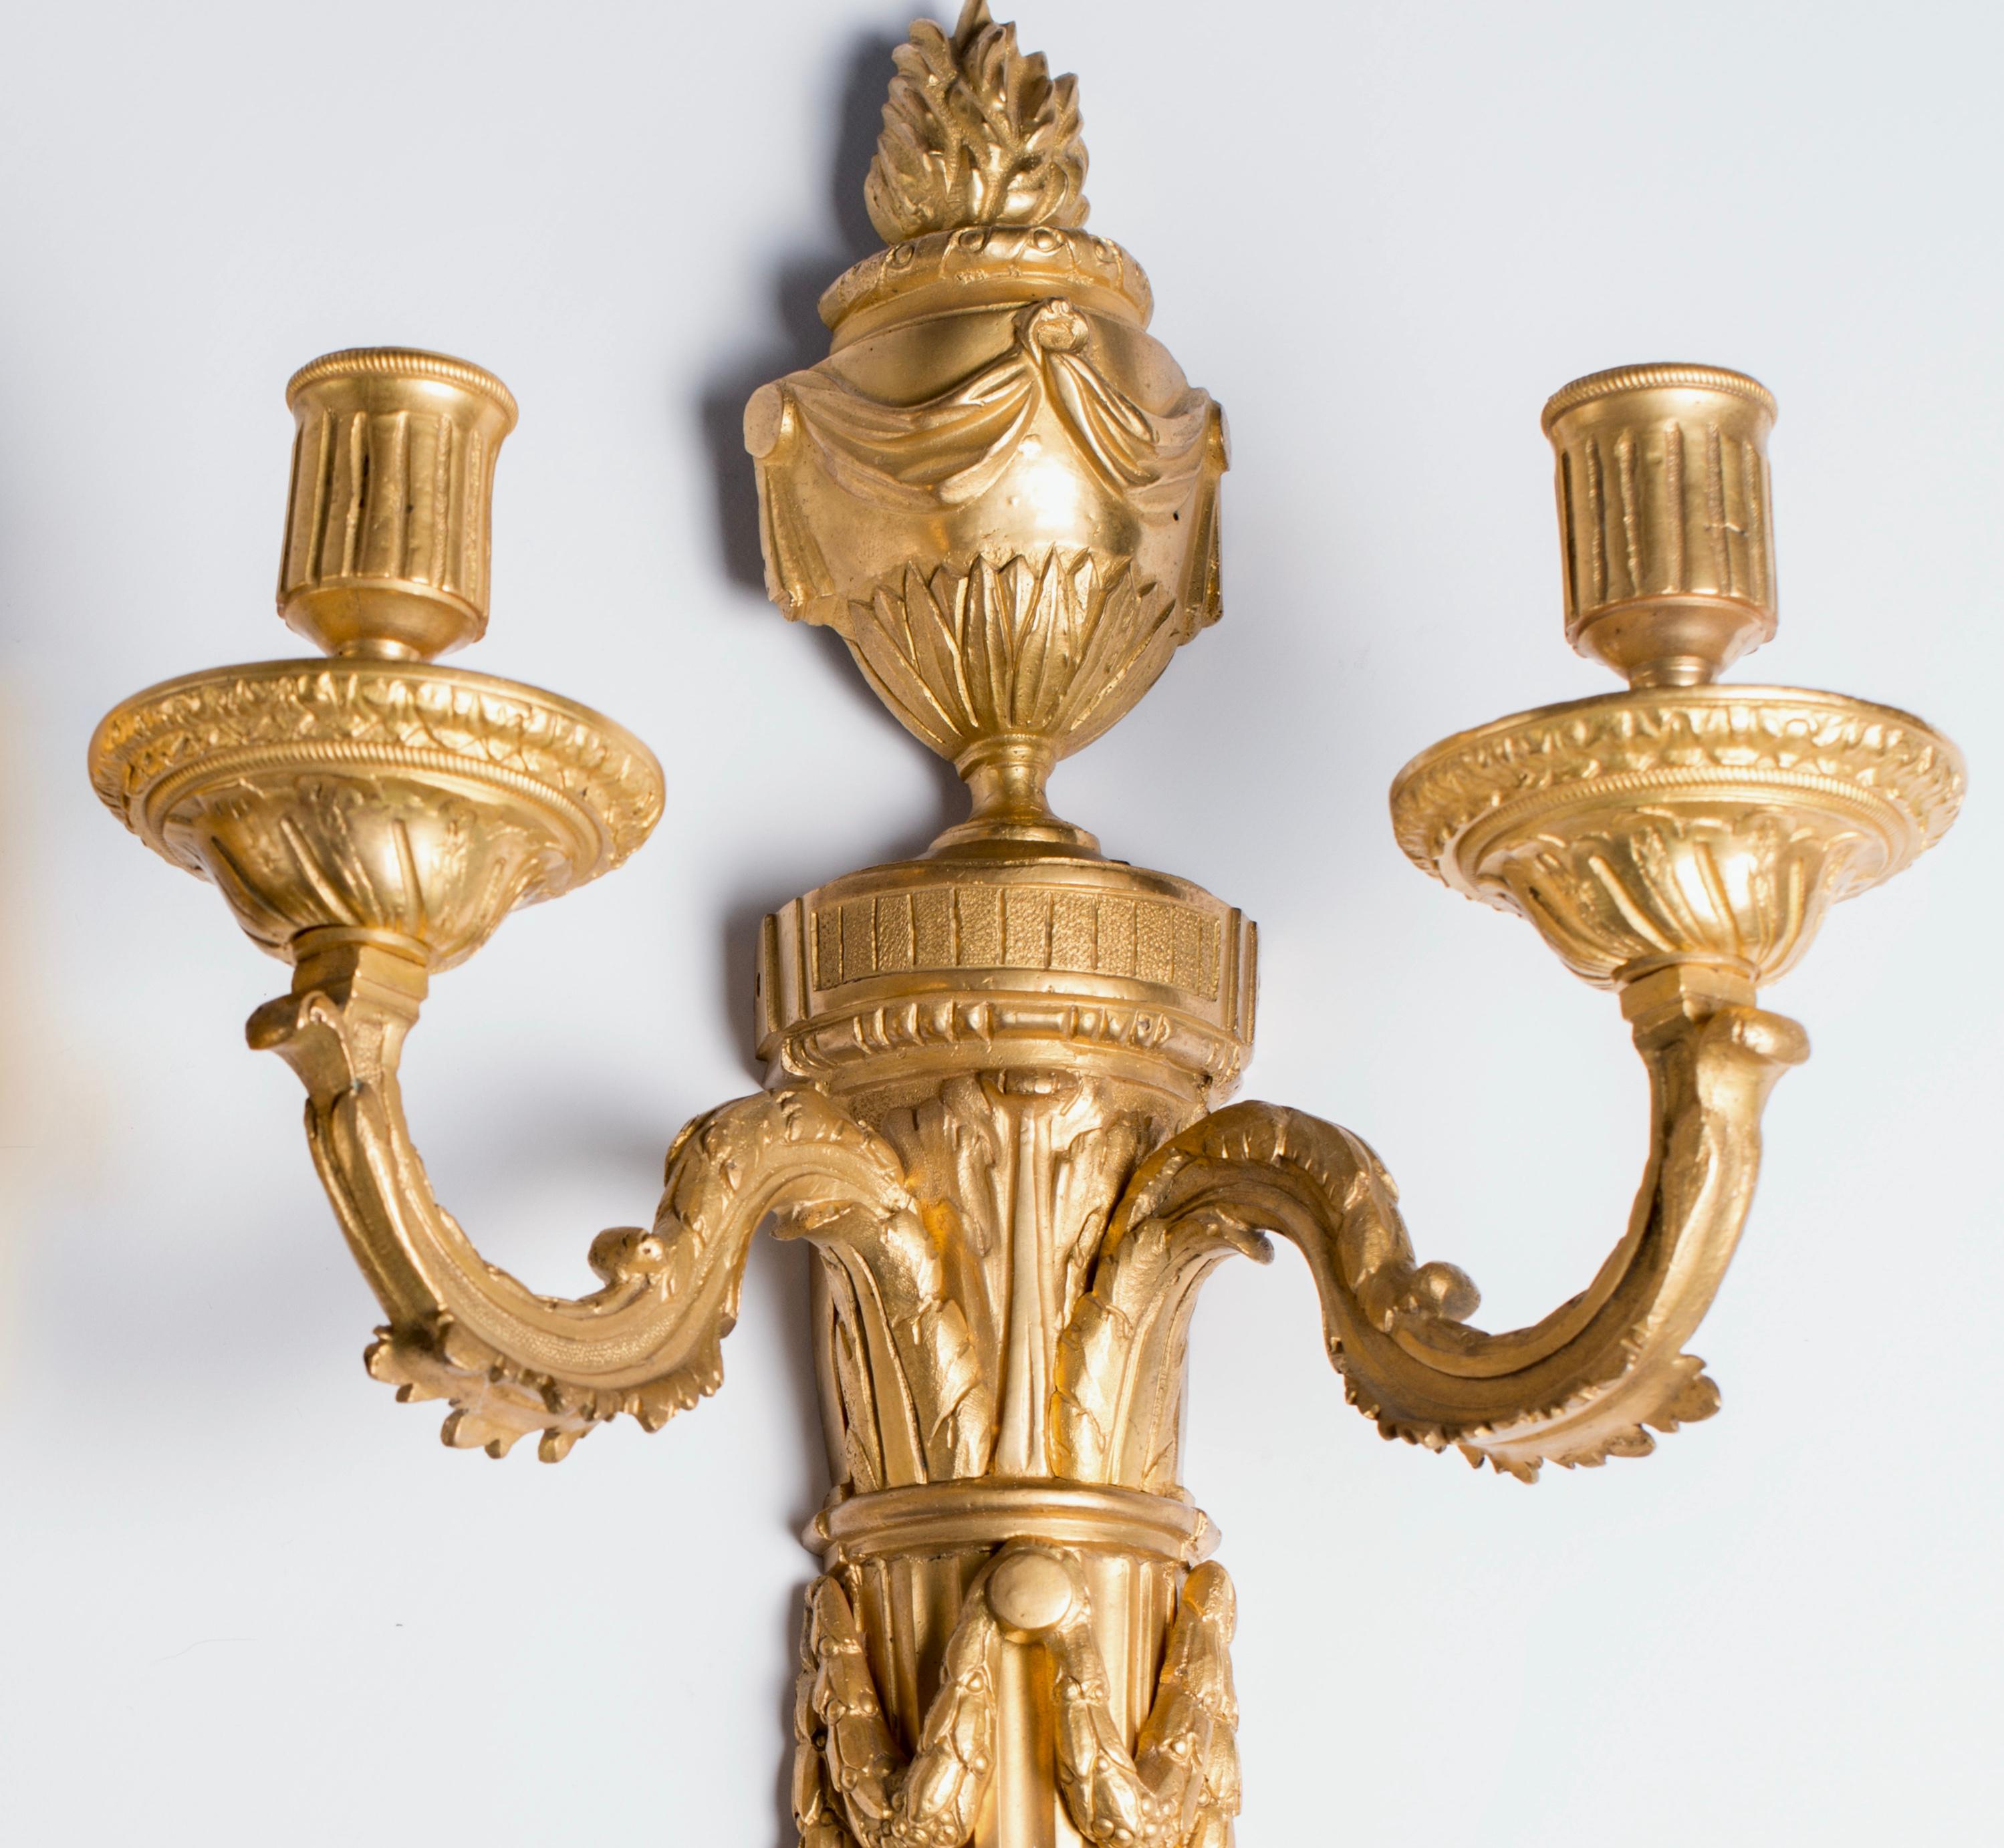 French monumental wall lights are in the neoclassical style and inspired by the Greek and Roman classical period.
The pair of wall lights are nicely casted in bronze and gilded. Each wall light is shown with a stop-fluted backplate surmounted by an